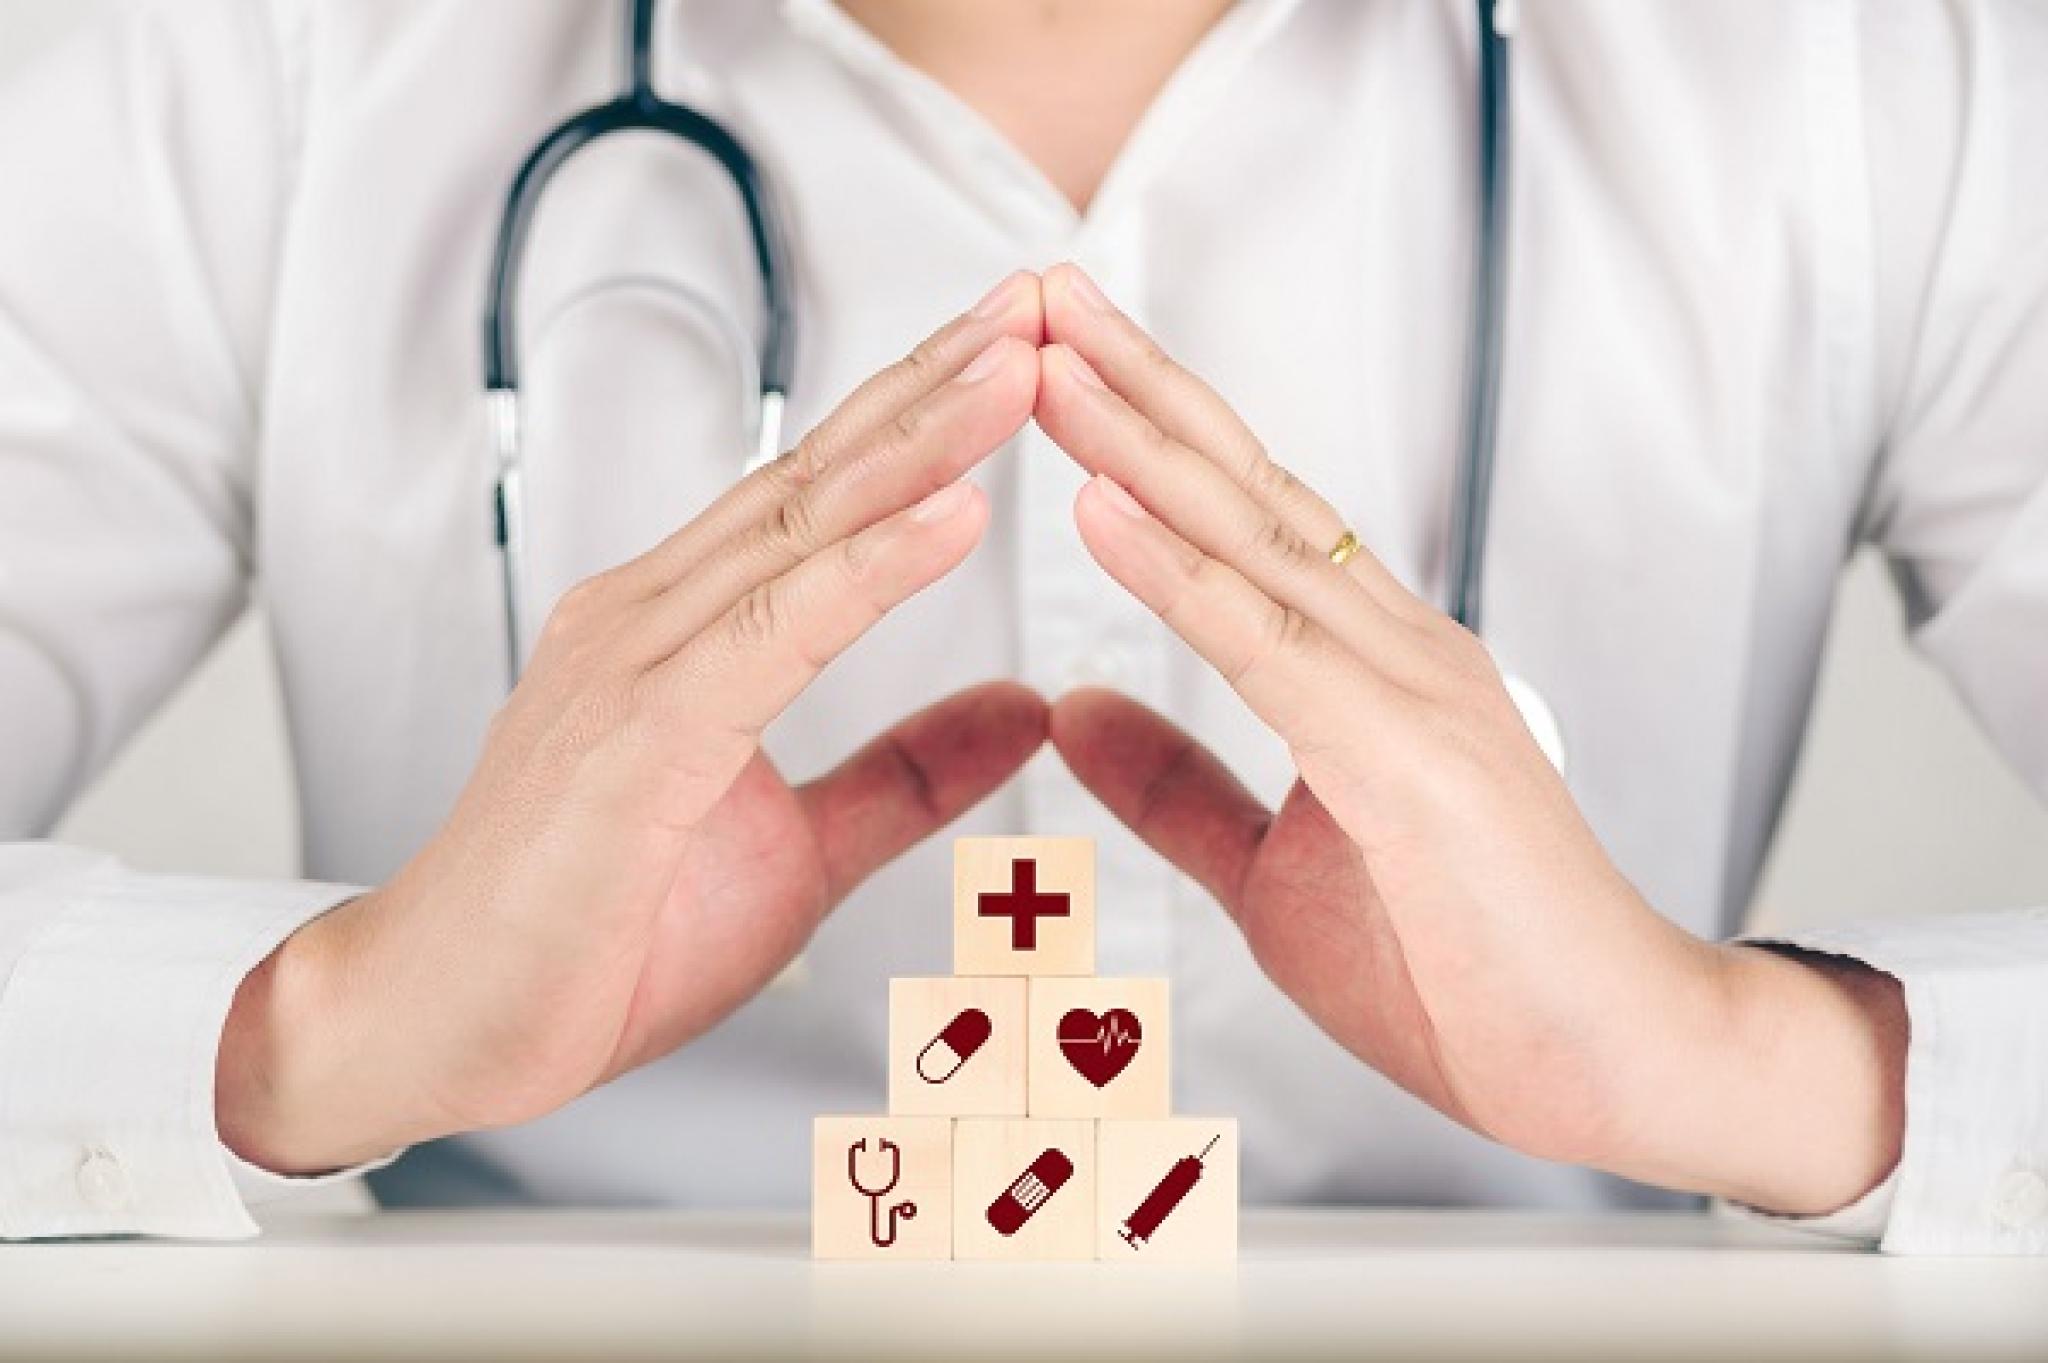 Image of hands of medical professional in a protective gesture over woodblocks with healthcare icons by Deemerwha Studio from Adobe Stock used under Education License 